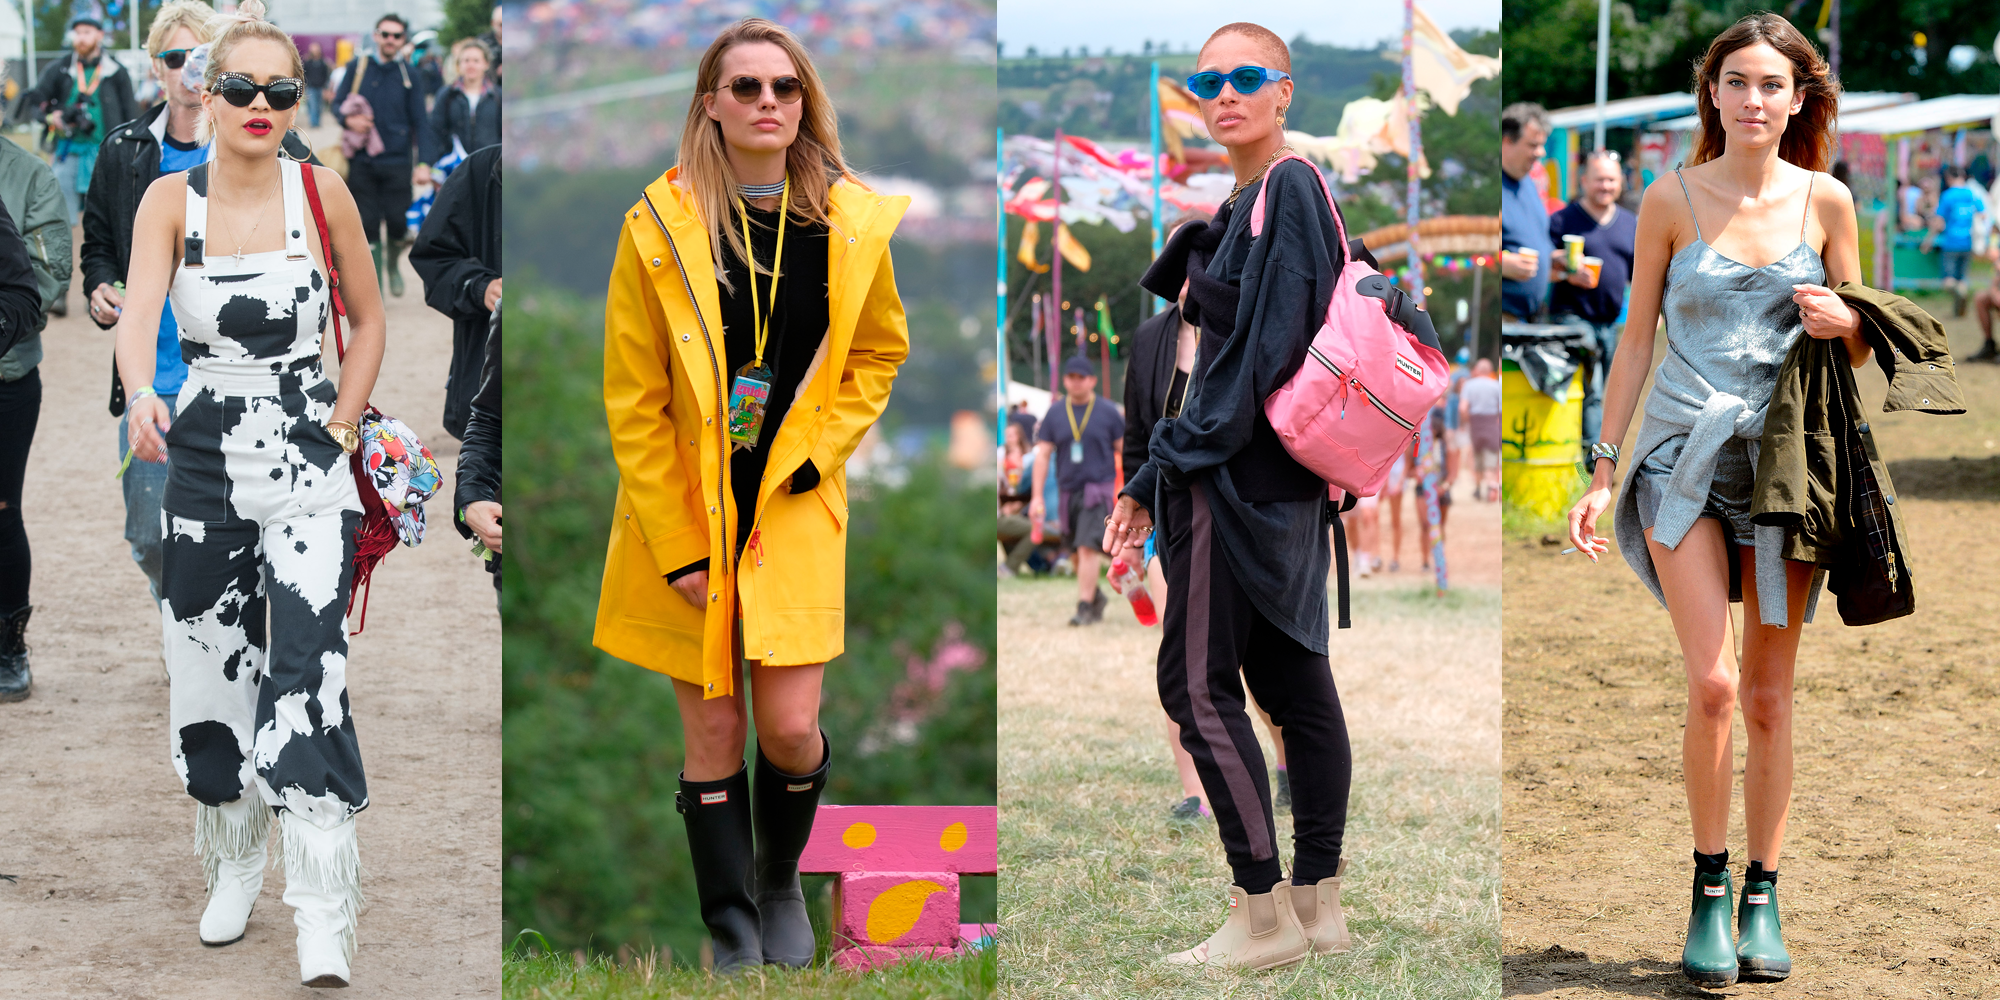 Festival Outfit Ideas for 2023, Sexy Festival Outfits